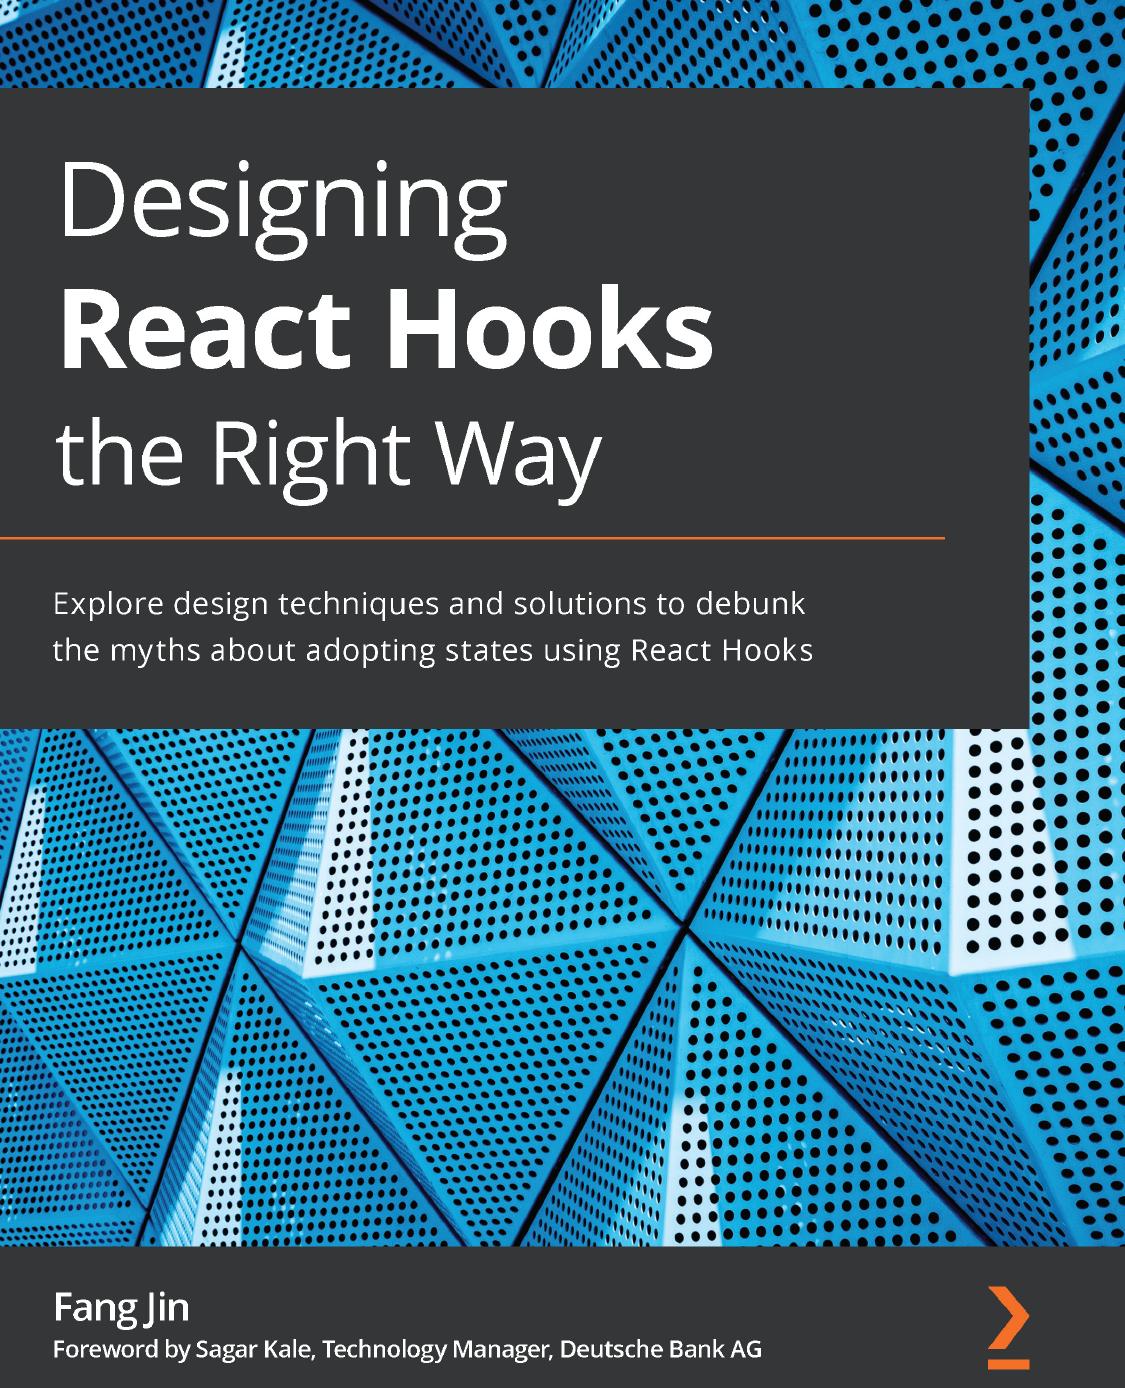 Designing React Hooks the Right Way - Explore design techniques and solutions to debunk the myths about adopting states using React Hooks